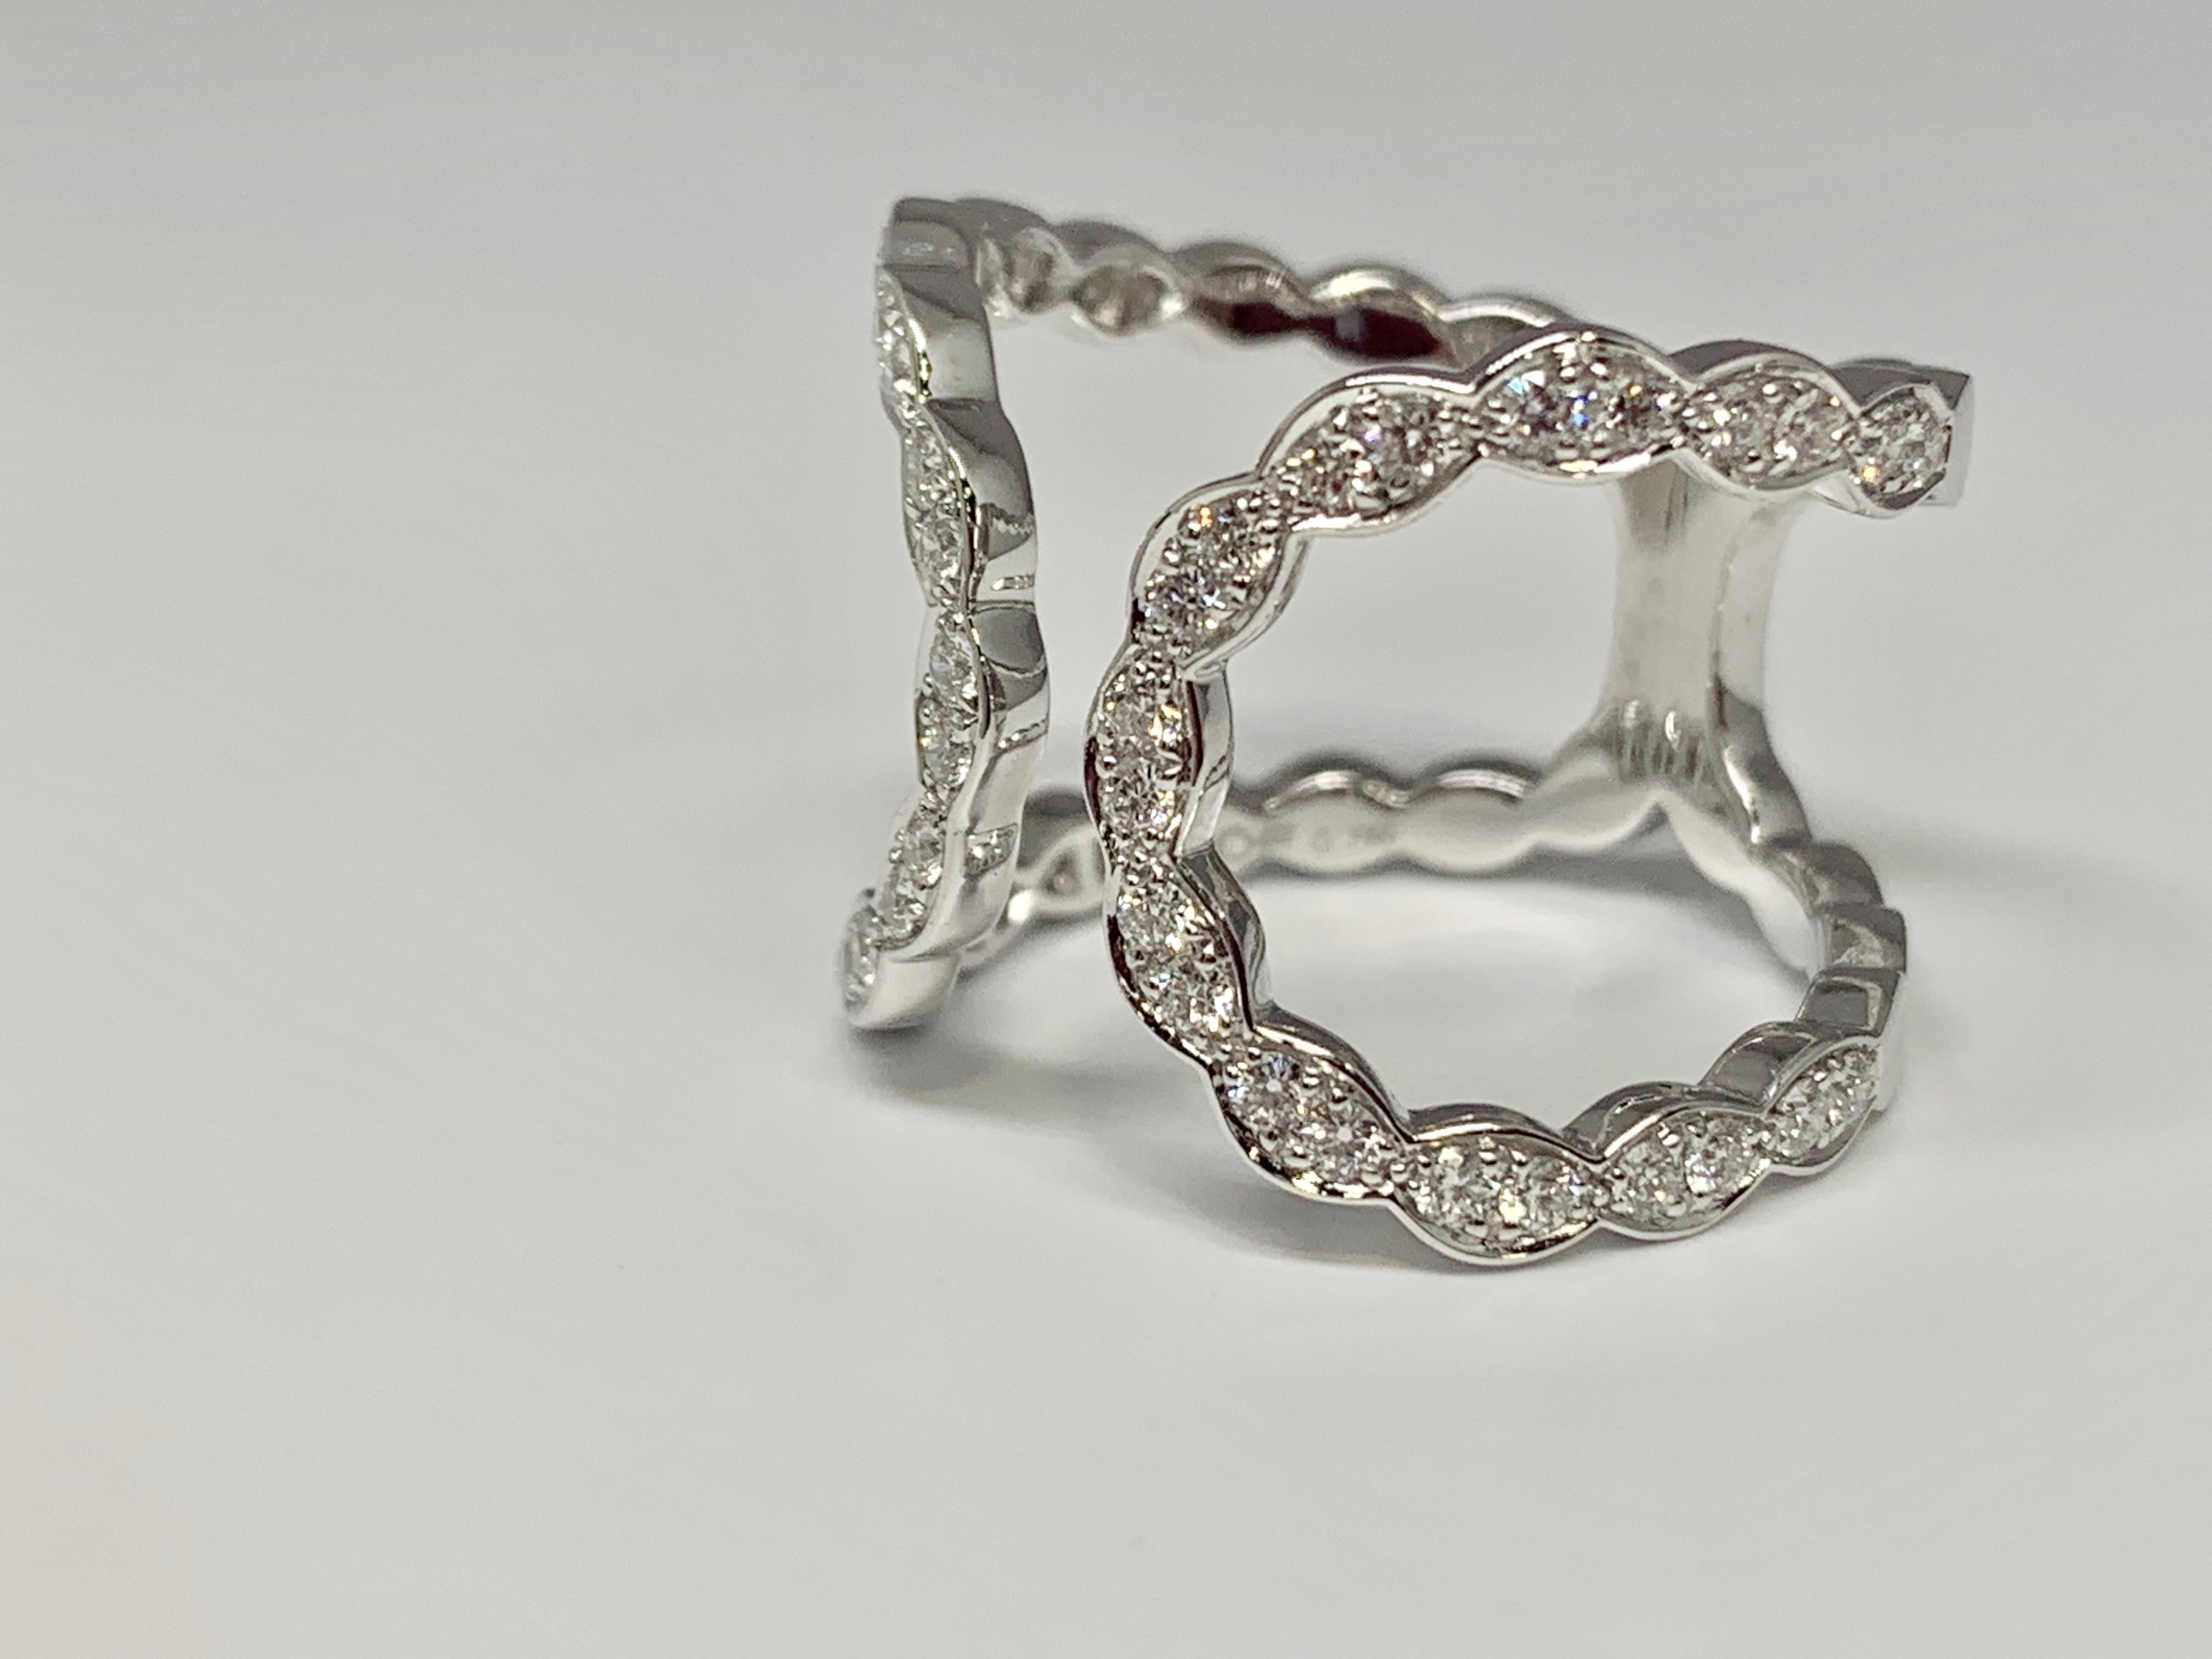 Hearts On Fire Lorelei Diamond Ring featuring a scalloped design and a 0.58 carat weight of round diamonds. This negative space diamond ring is made of 18K white gold. Currently a size 6.5 but can be resized upon request. This piece will be shipped